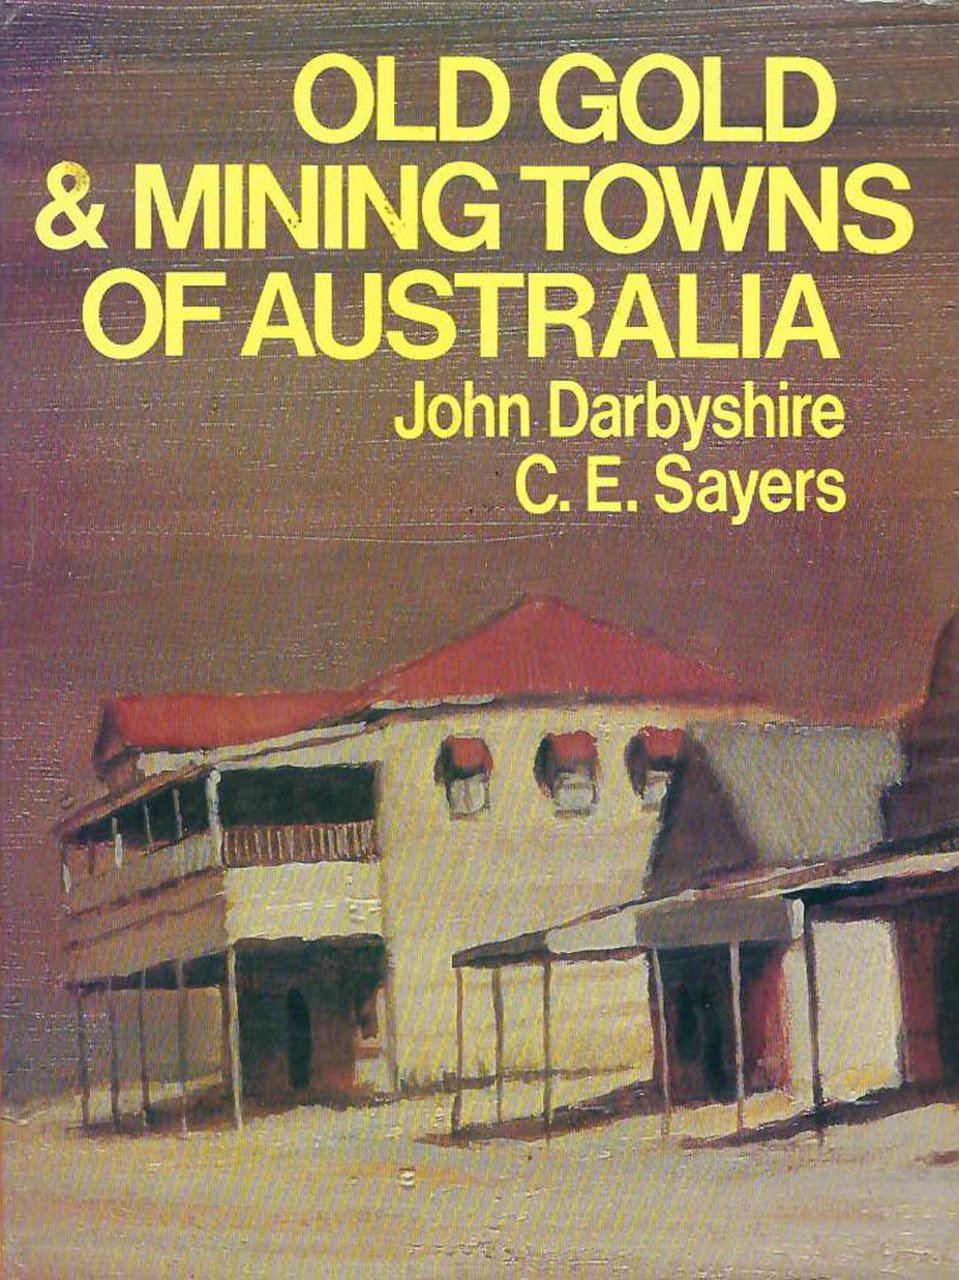 Old gold & mining towns of Australia, 1980